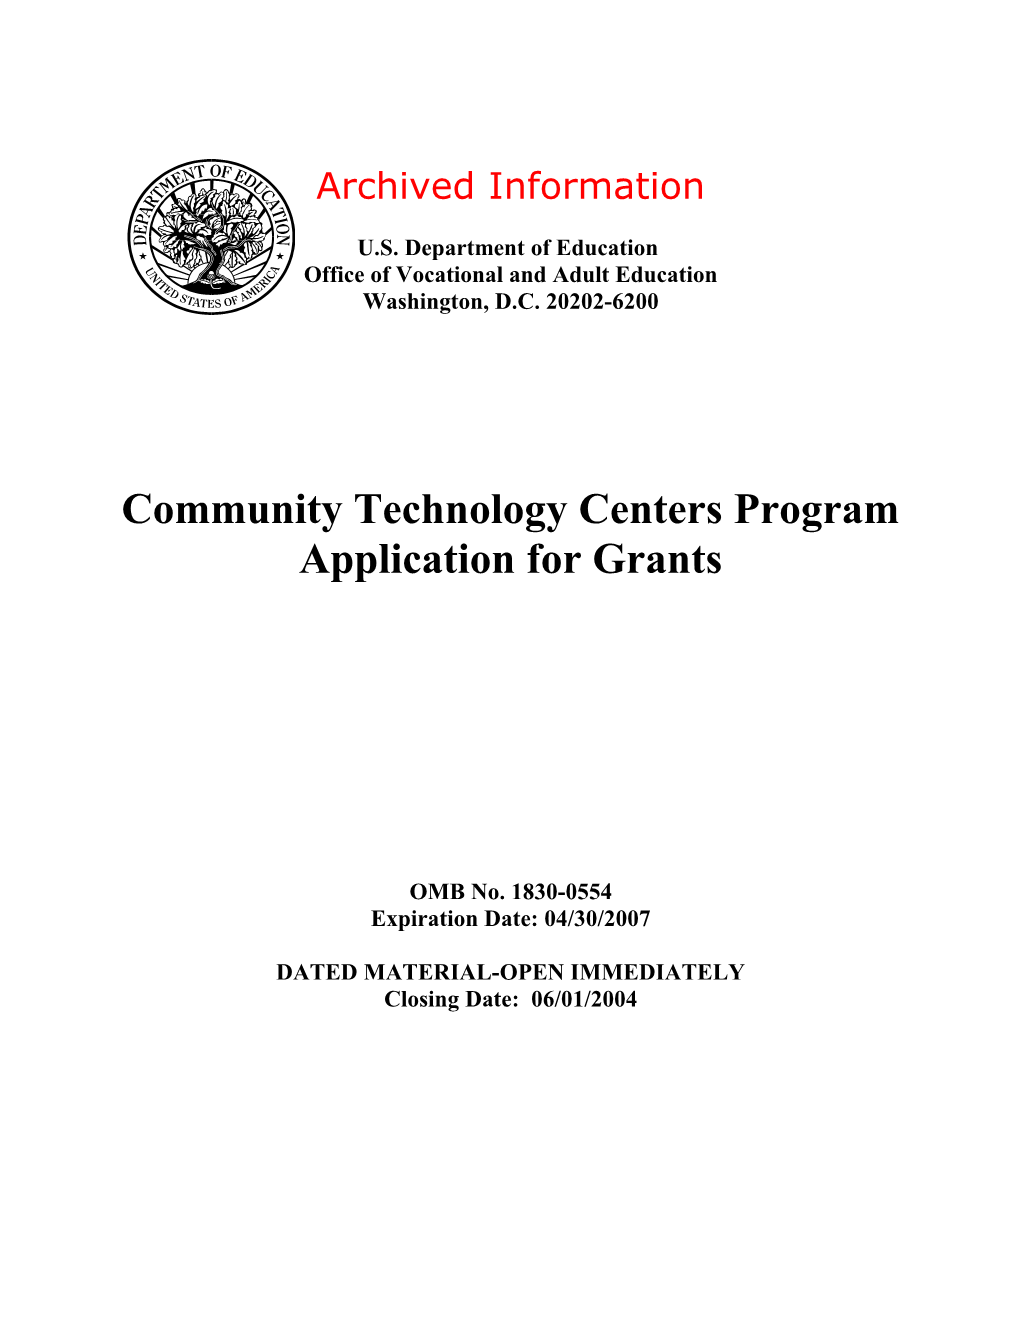 Archived: FY 04 Applicaton for the Community Technololgy Centers Application Program (MS Word)